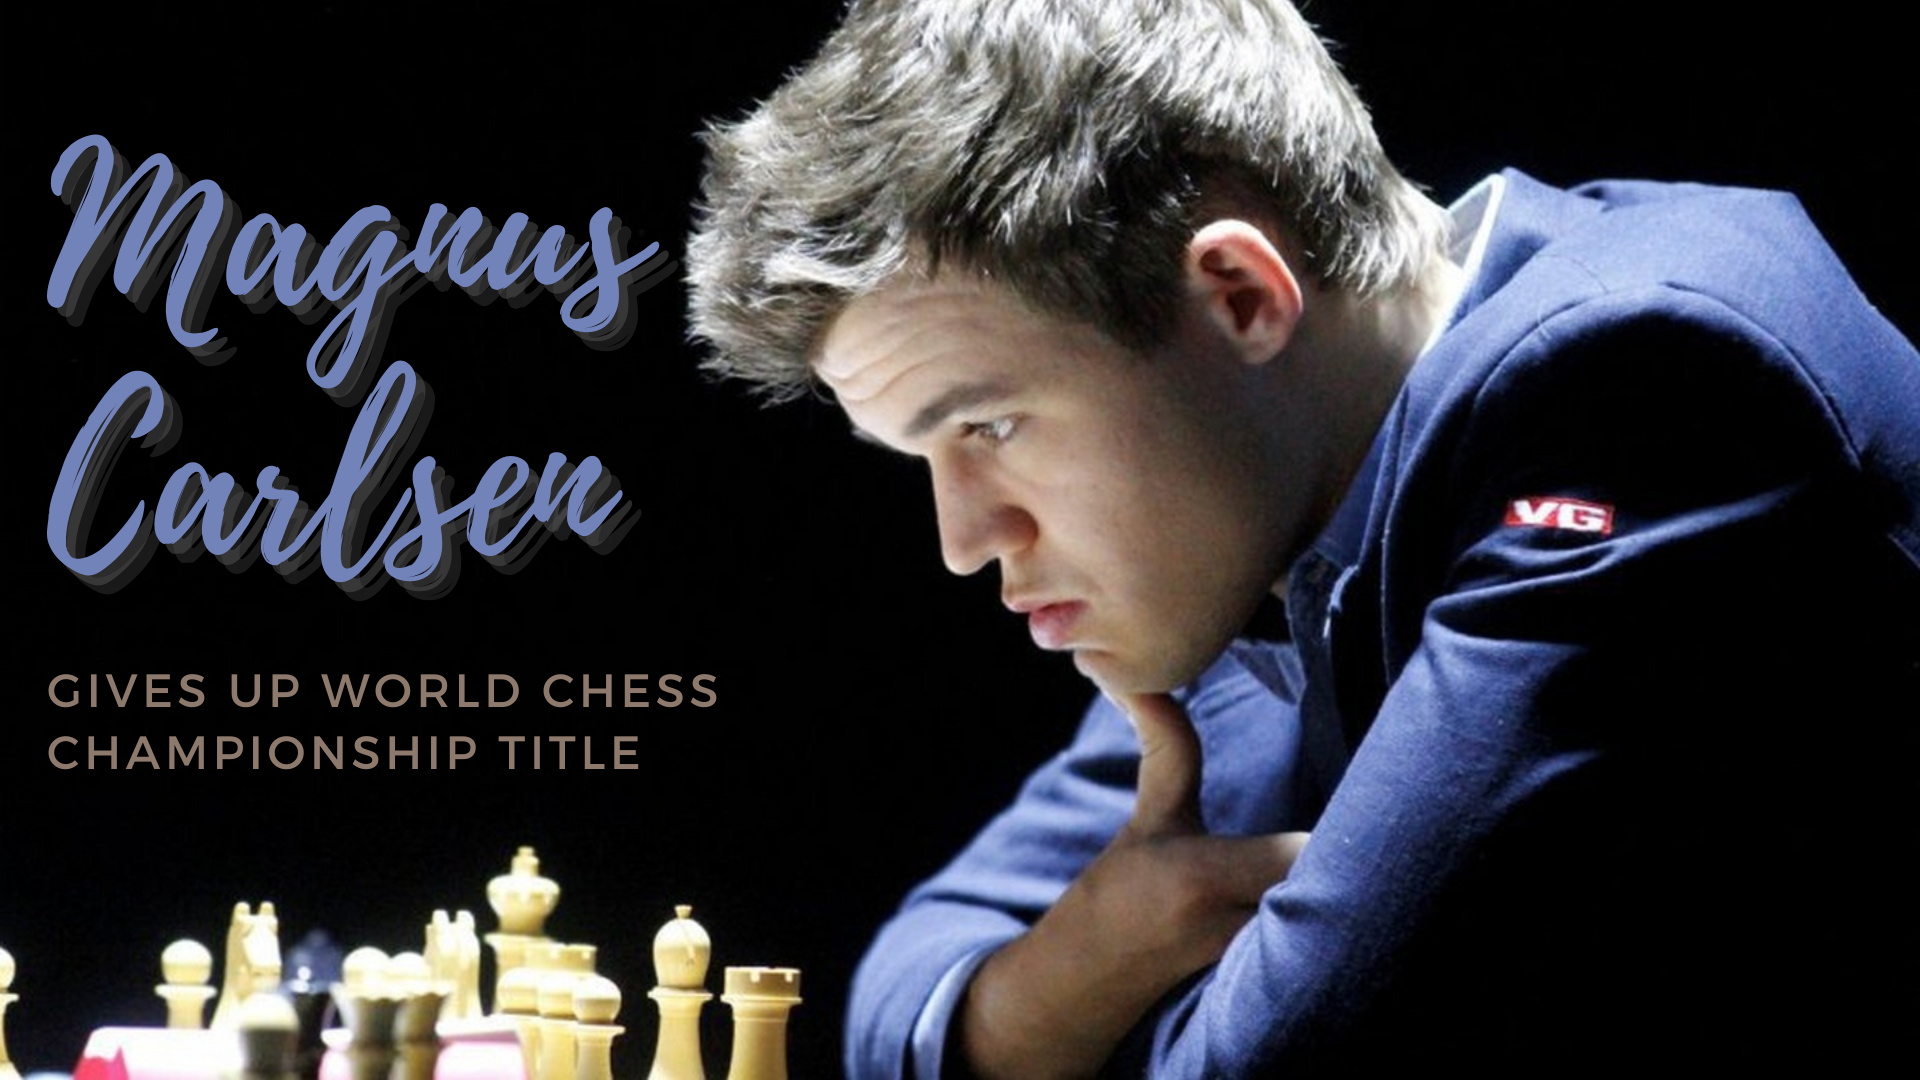 Magnus Carlsen Gives Up World Chess Championship Title